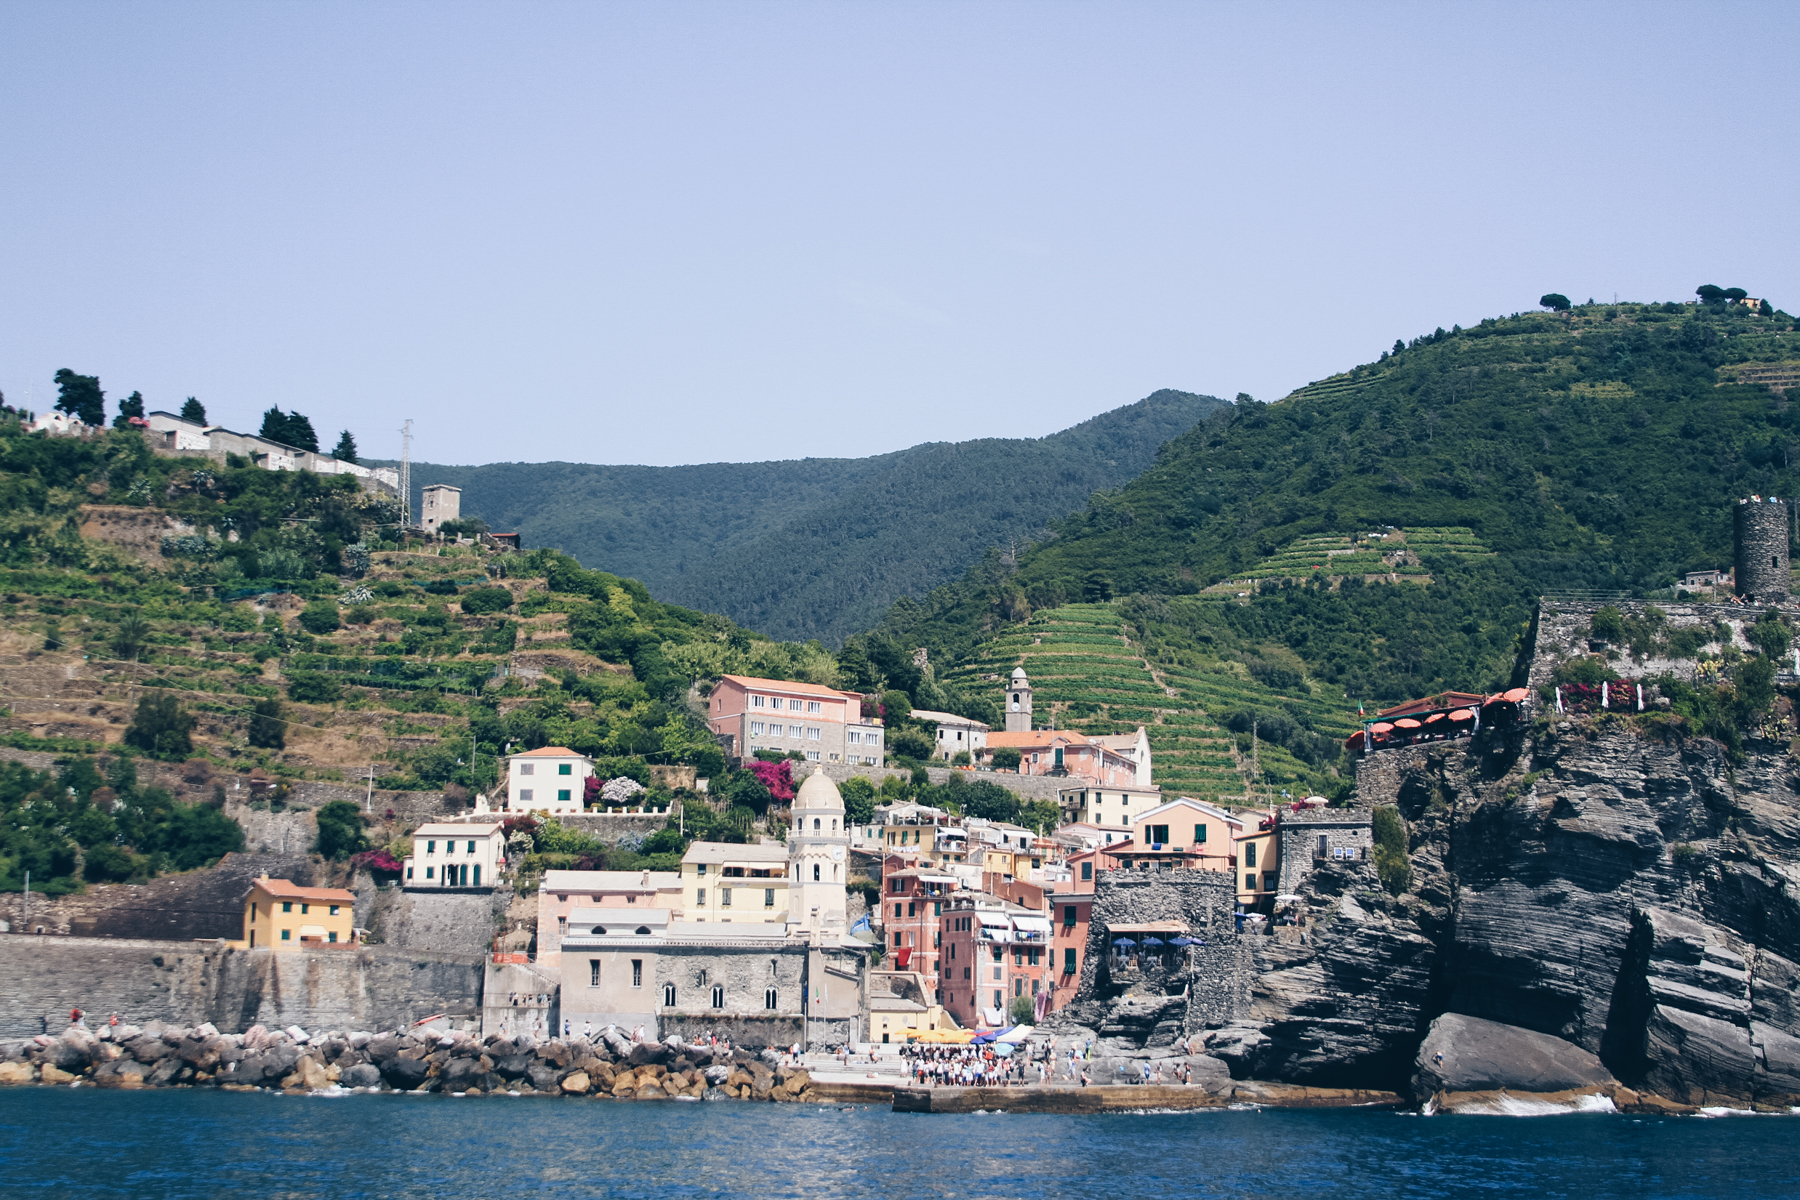 How (Not) to See Cinque Terre, Italy in One Day | You just can’t see all five towns on a day trip! But with this guide of the best things to do (from beaches and hiking paths to food and views), you can plan your own perfect Cinque Terre itinerary -…